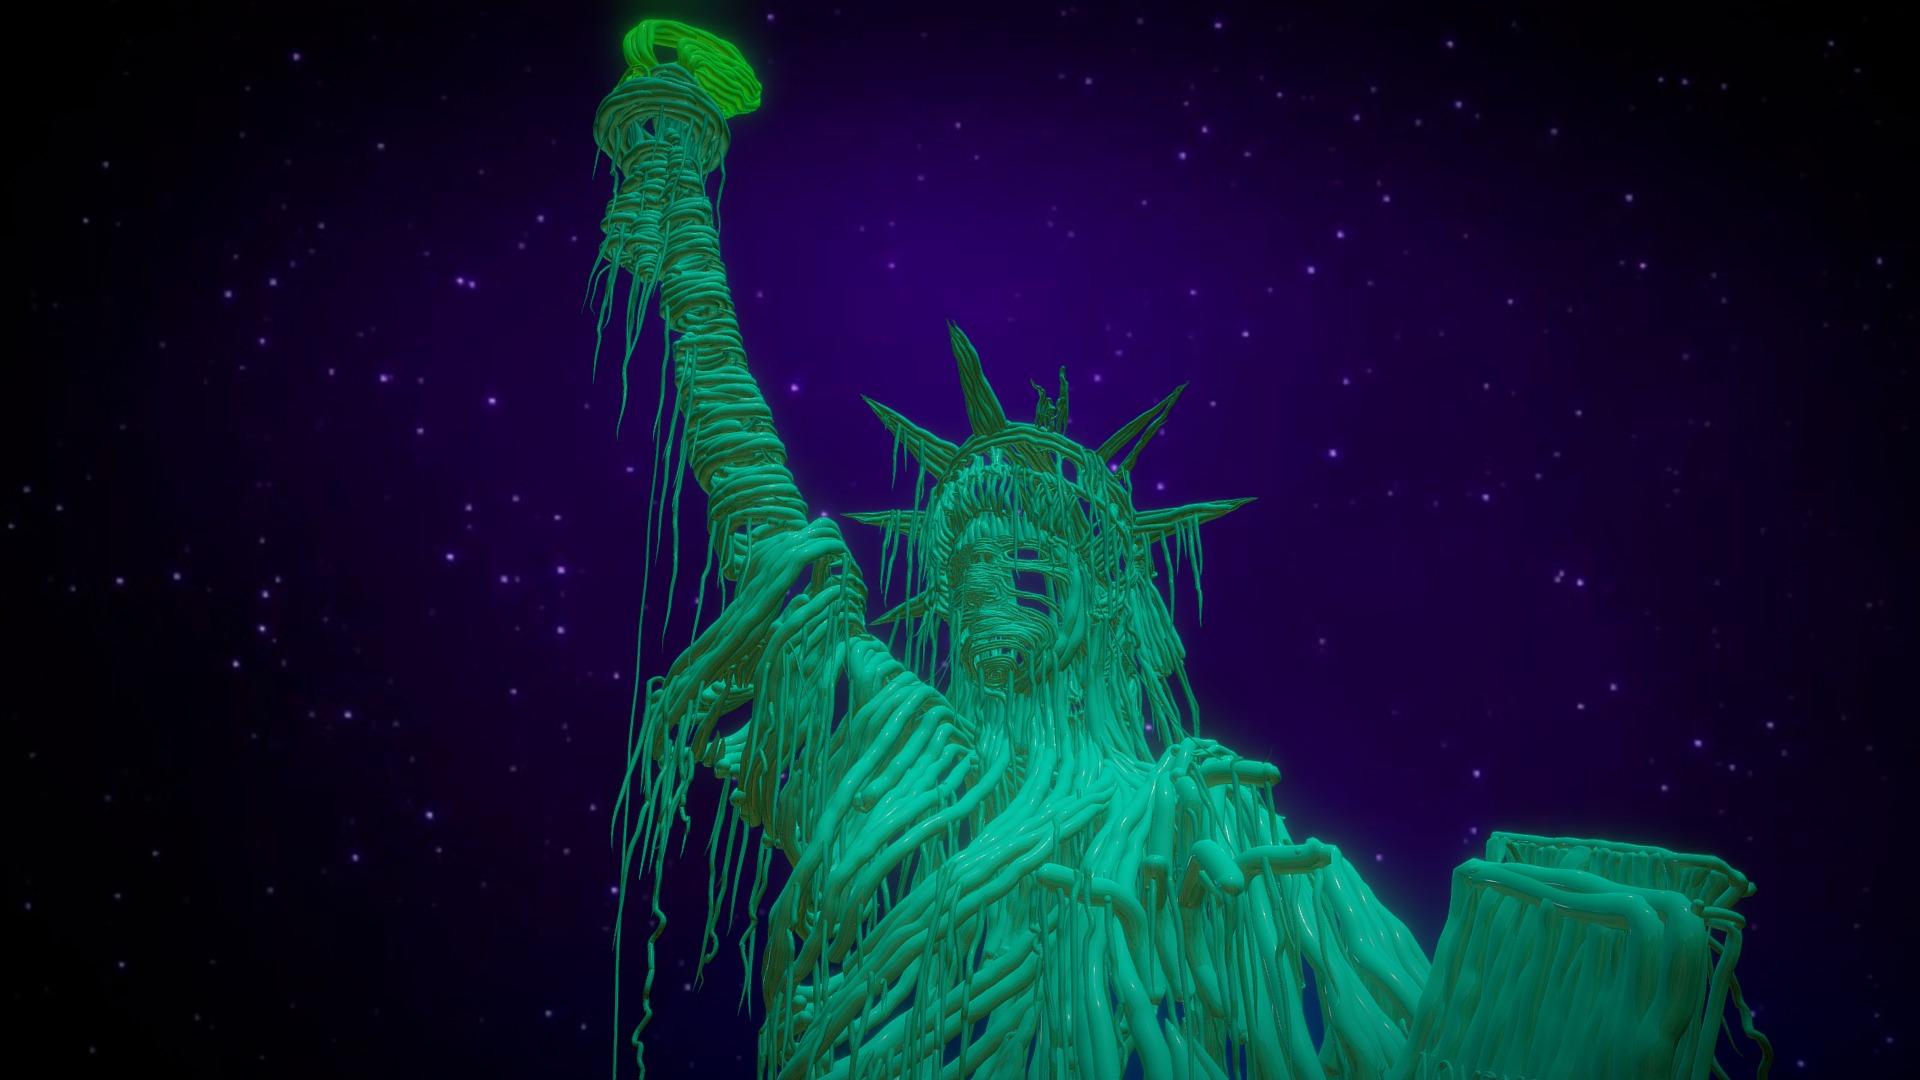 3D model Tilt Brush: "America great again? - This is a 3D model of the Tilt Brush: "America great again?. The 3D model is about a person in a garment.